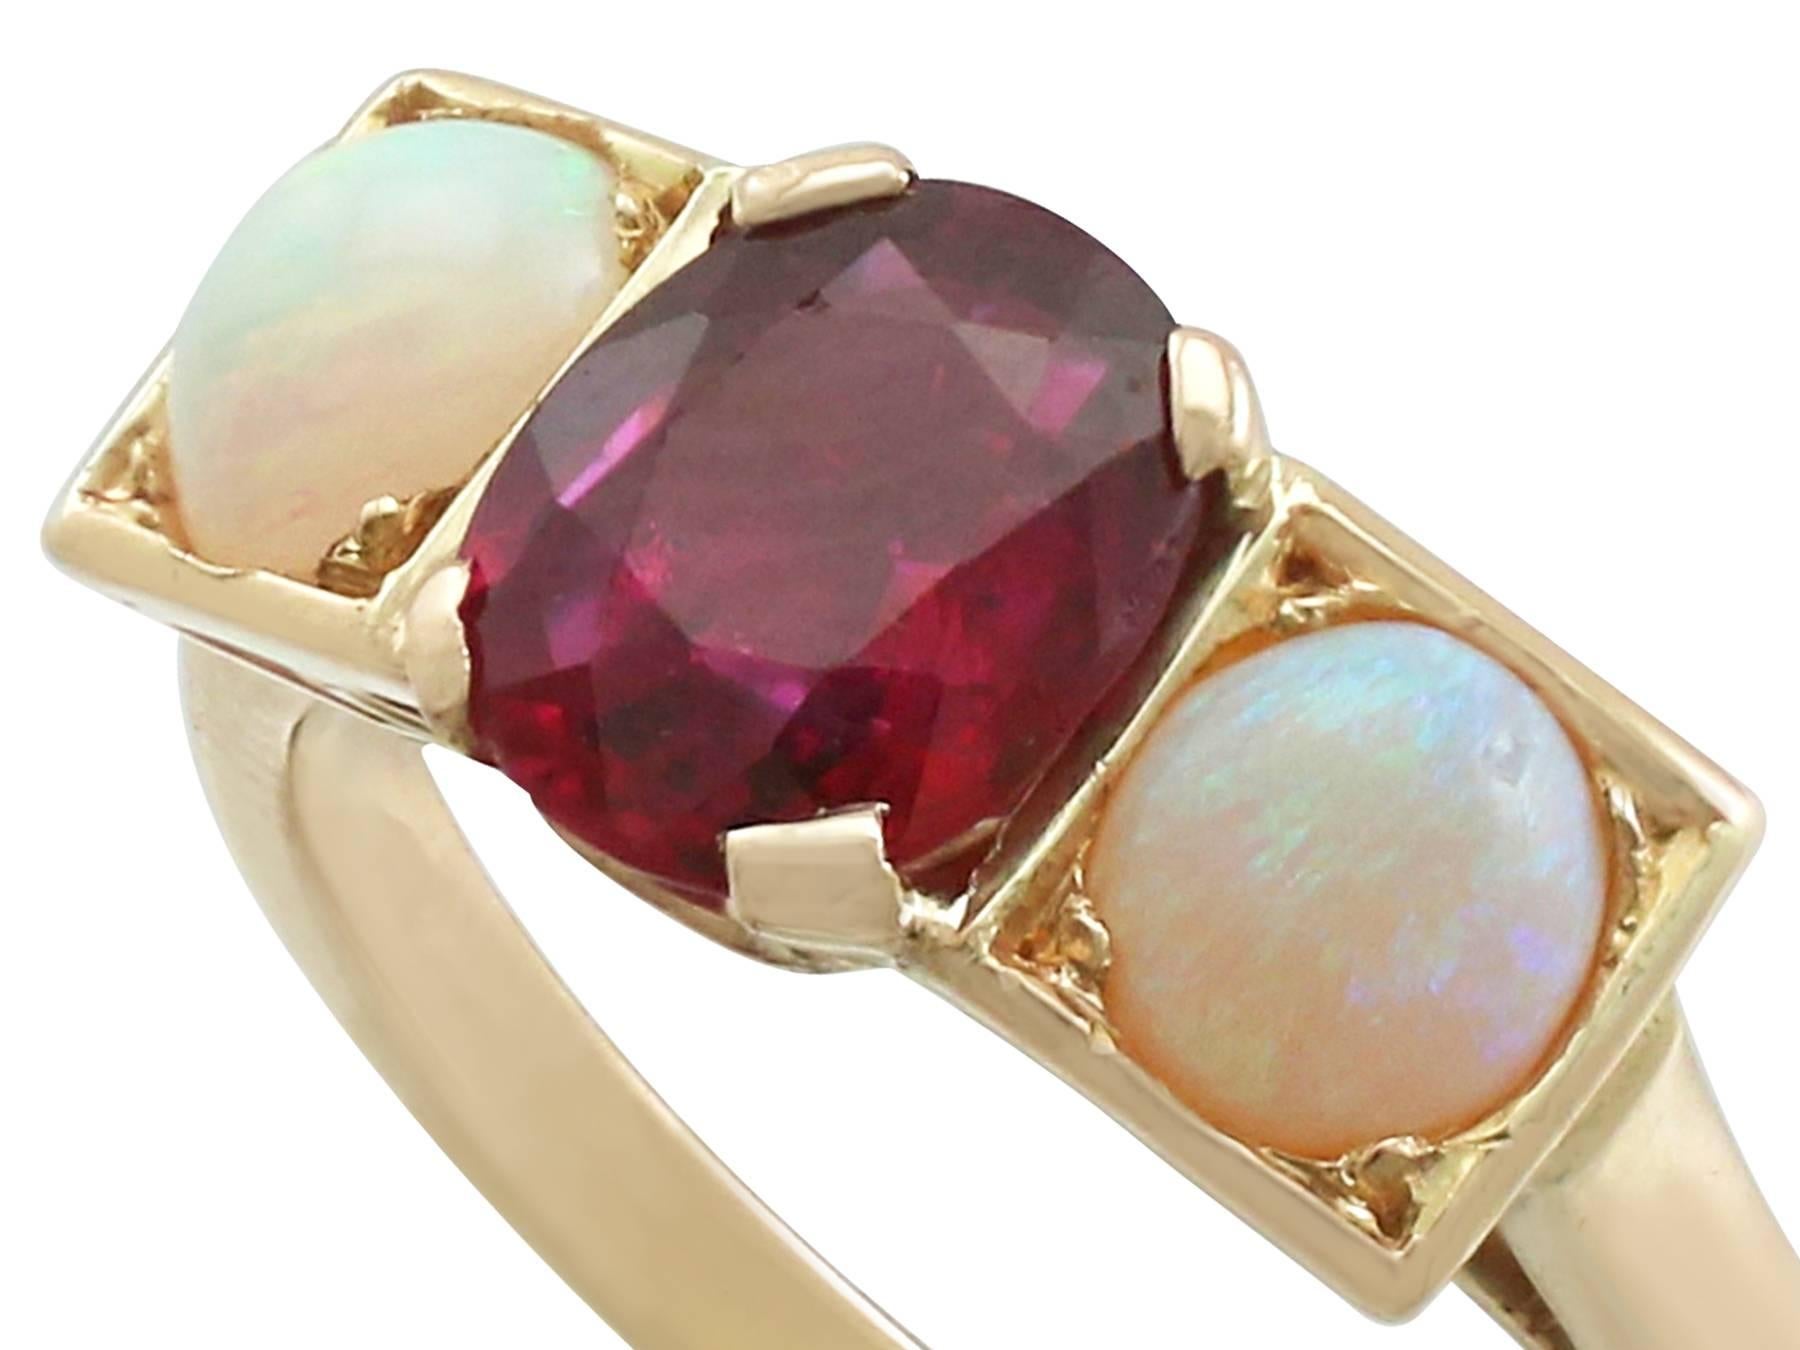 Oval Cut Vintage French 1.86 Carat Ruby and Opal 18 Karat Yellow Gold Dress Ring